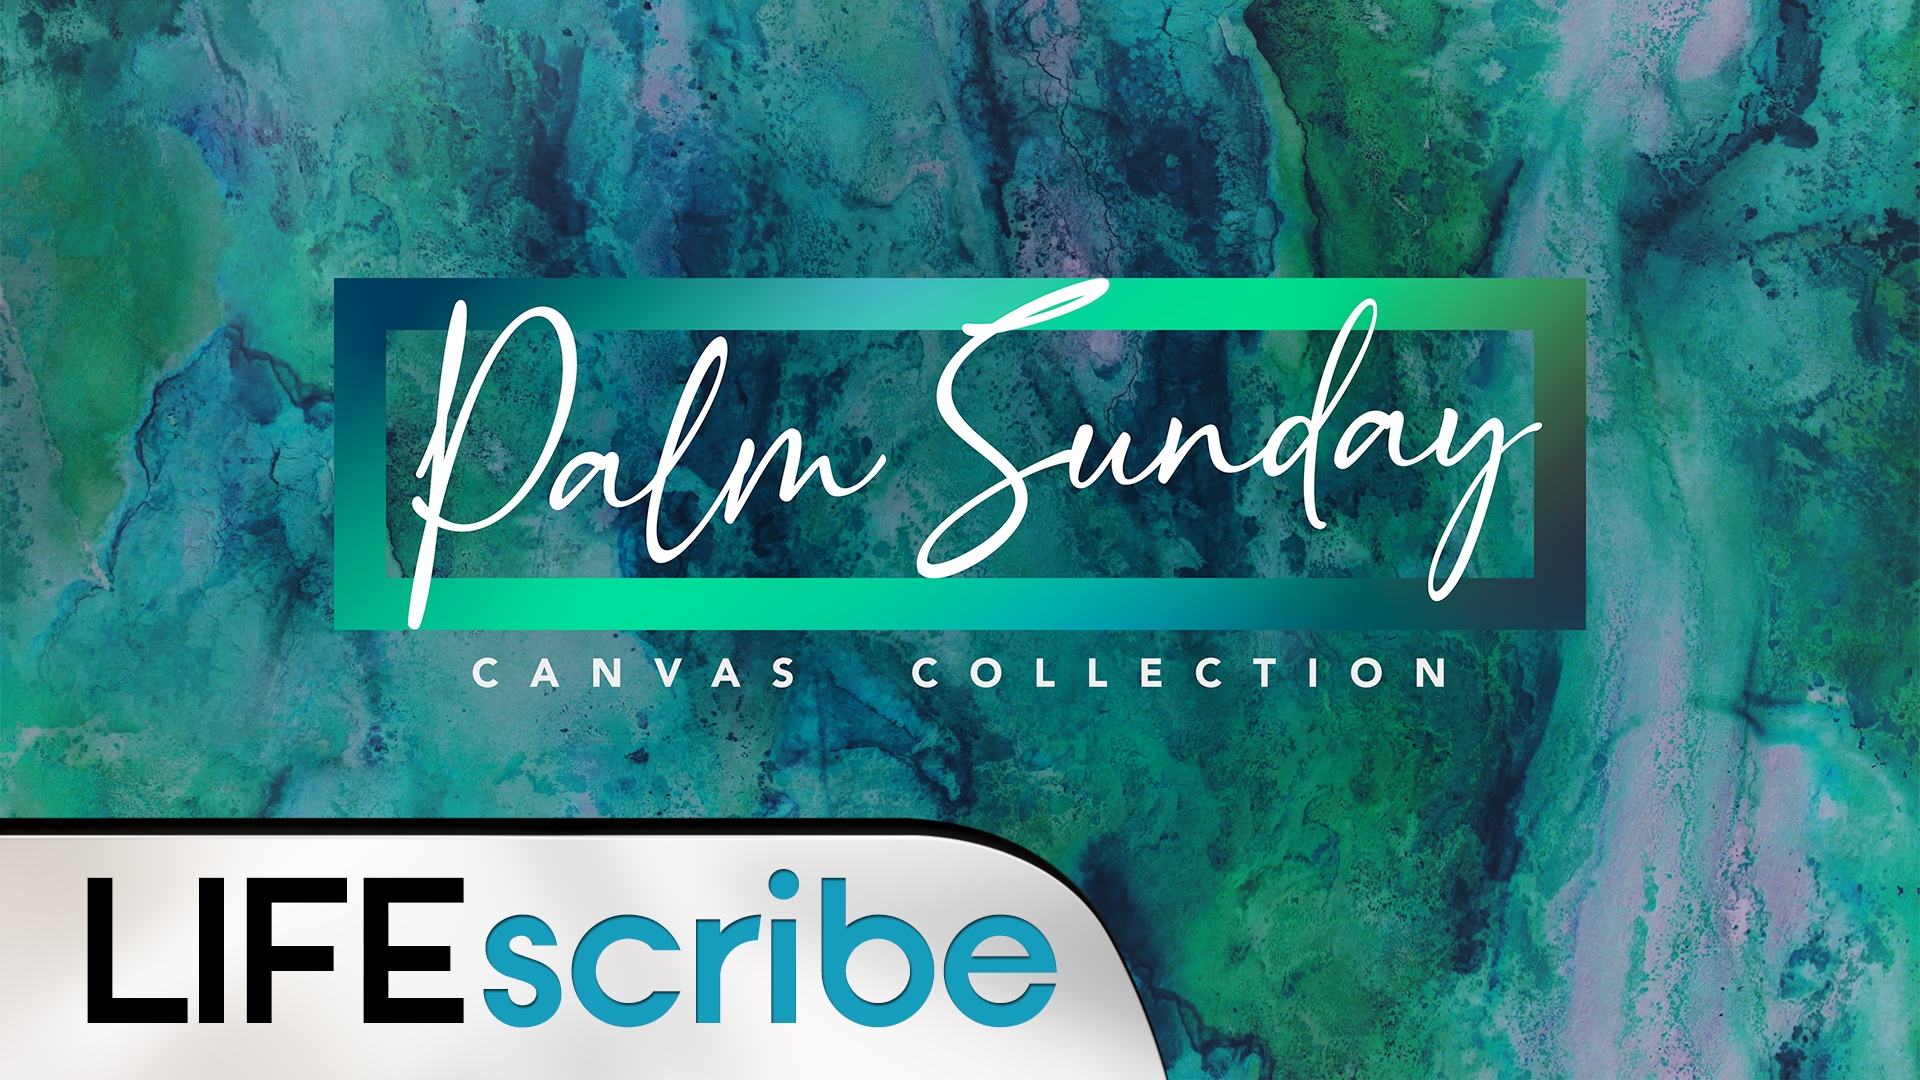 Palm Sunday Canvas Collection